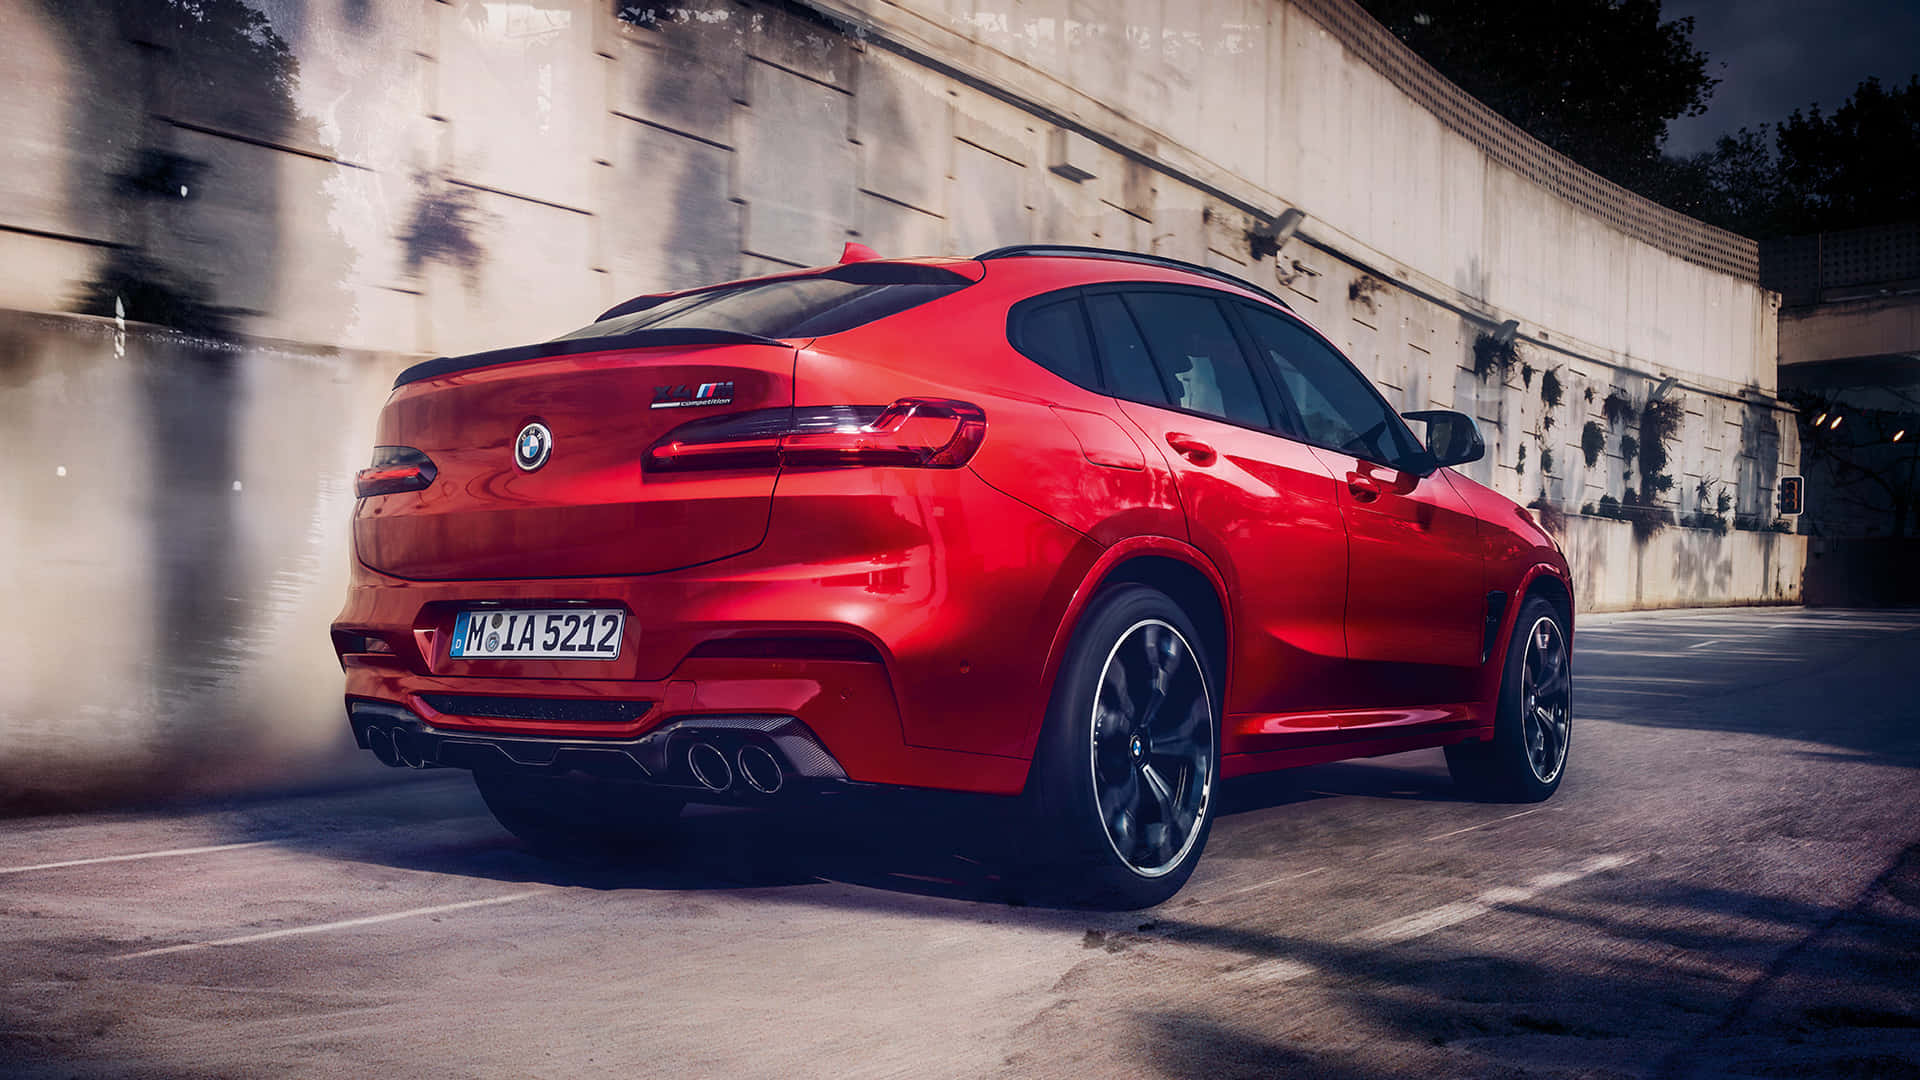 Stunning BMW X4 in its Prime Wallpaper